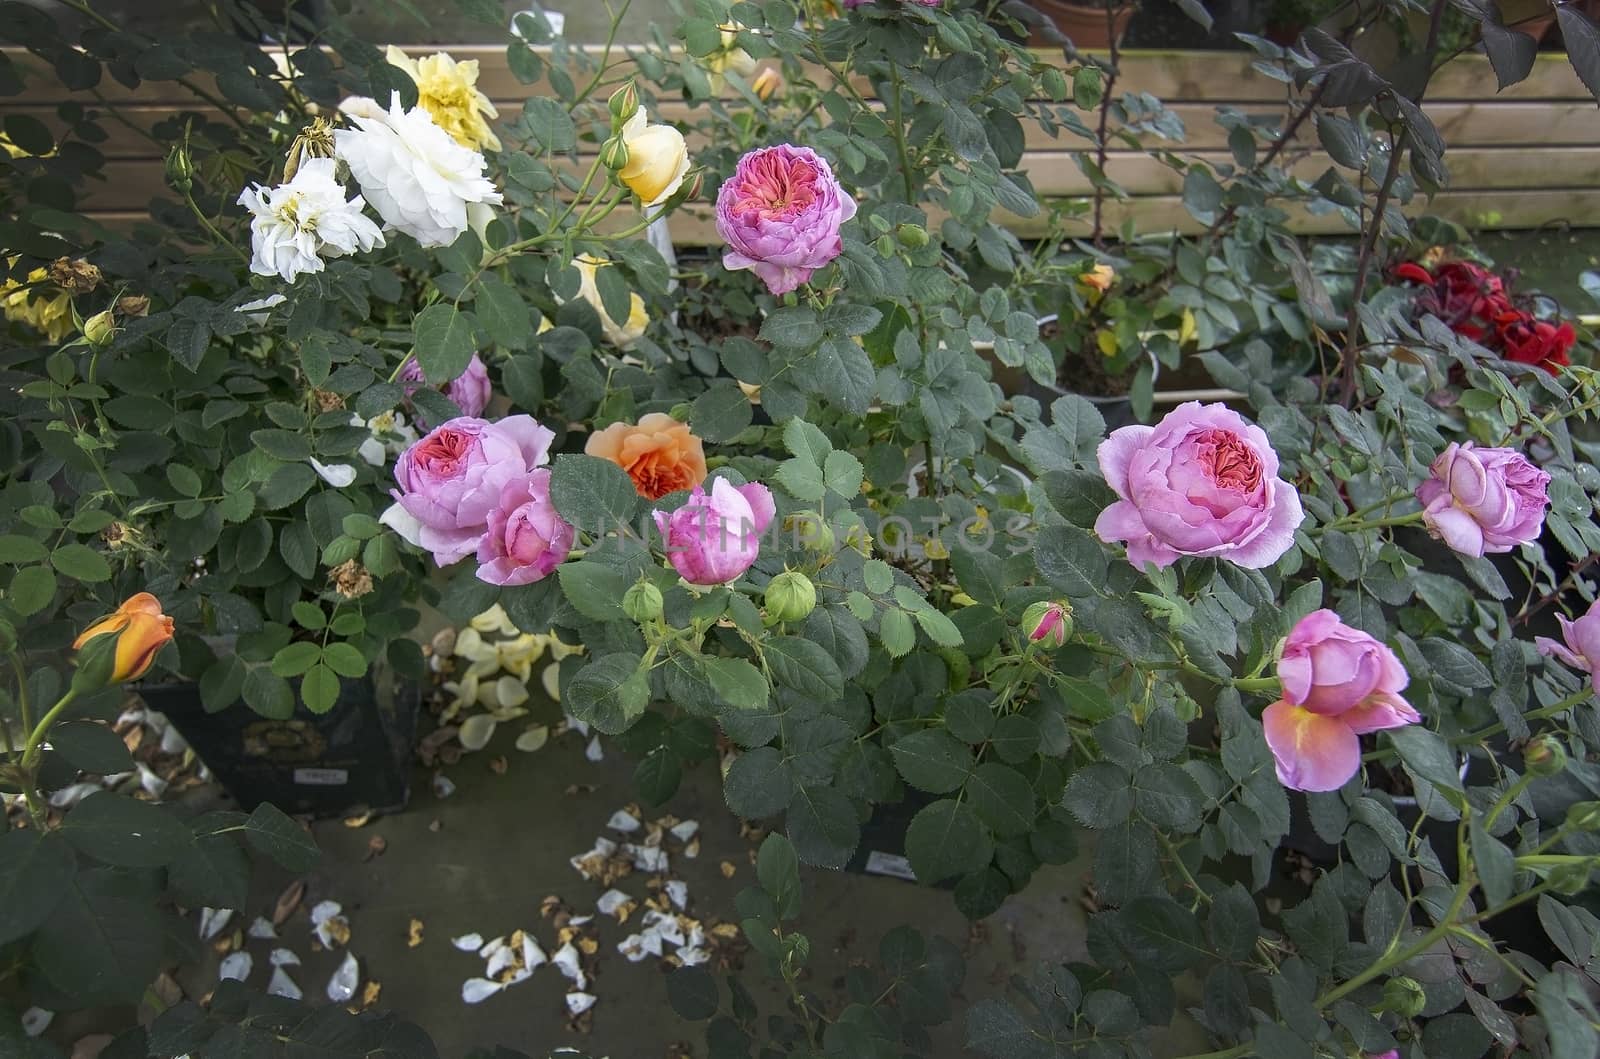 Gorgeous double pink  and yellow roses with buds and fallen petals. Spring garden series, Mallorca, Spain.